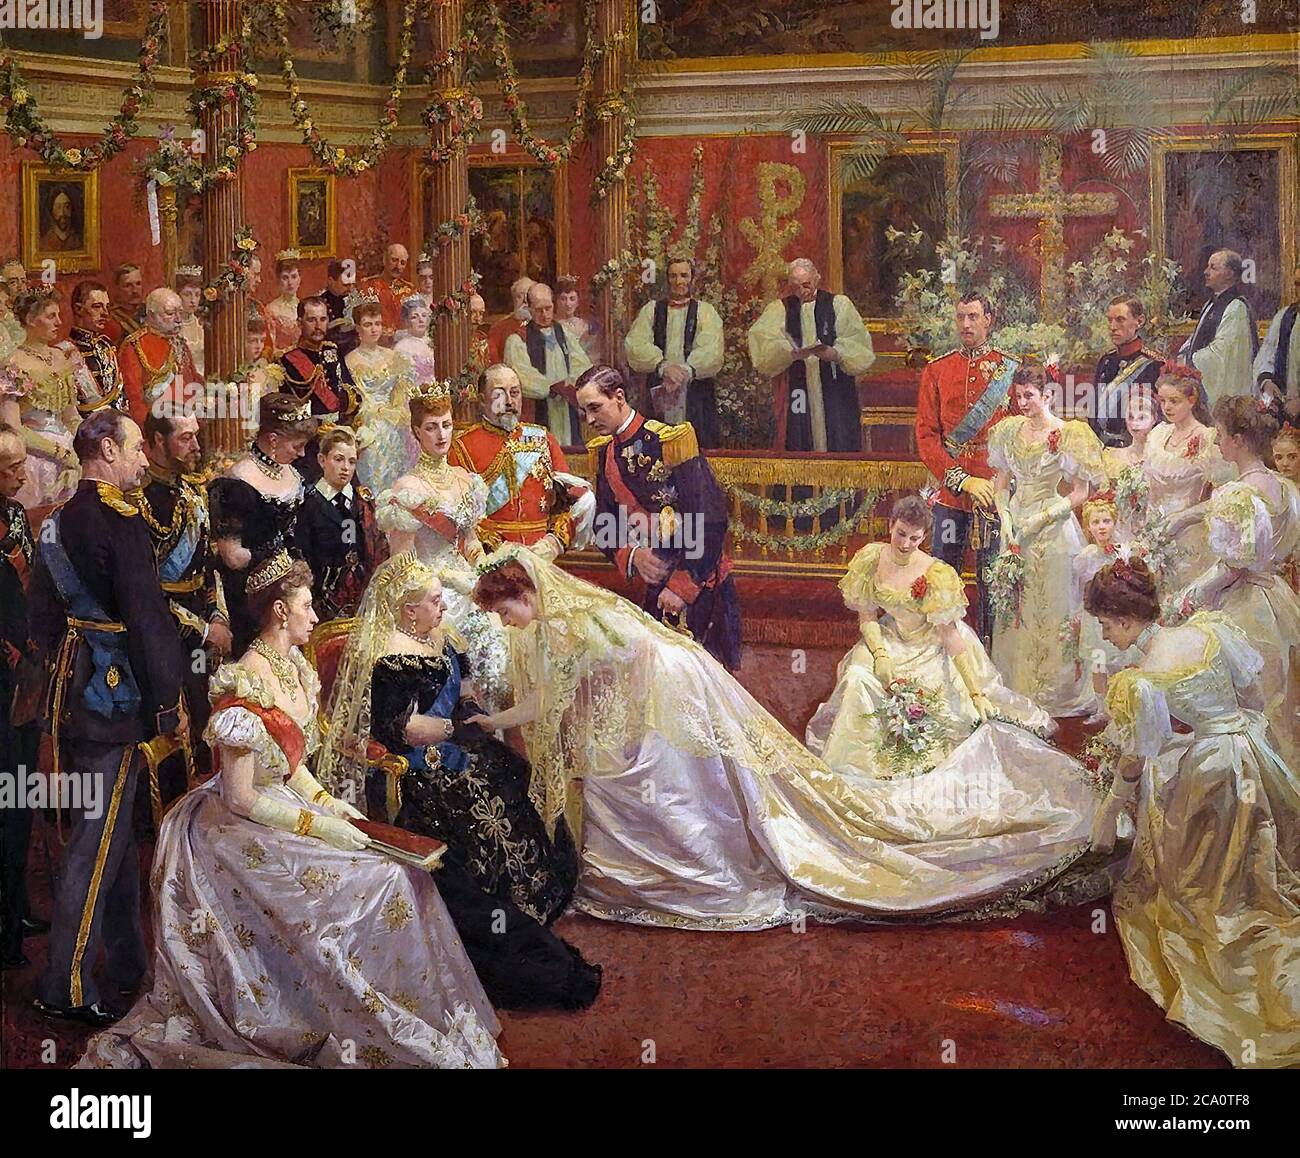 Tuxen Laurits - the Marriage of Princess Maud of Wales 22 July 1896 - Danish School - 19th and Early 20th Century Stock Photo